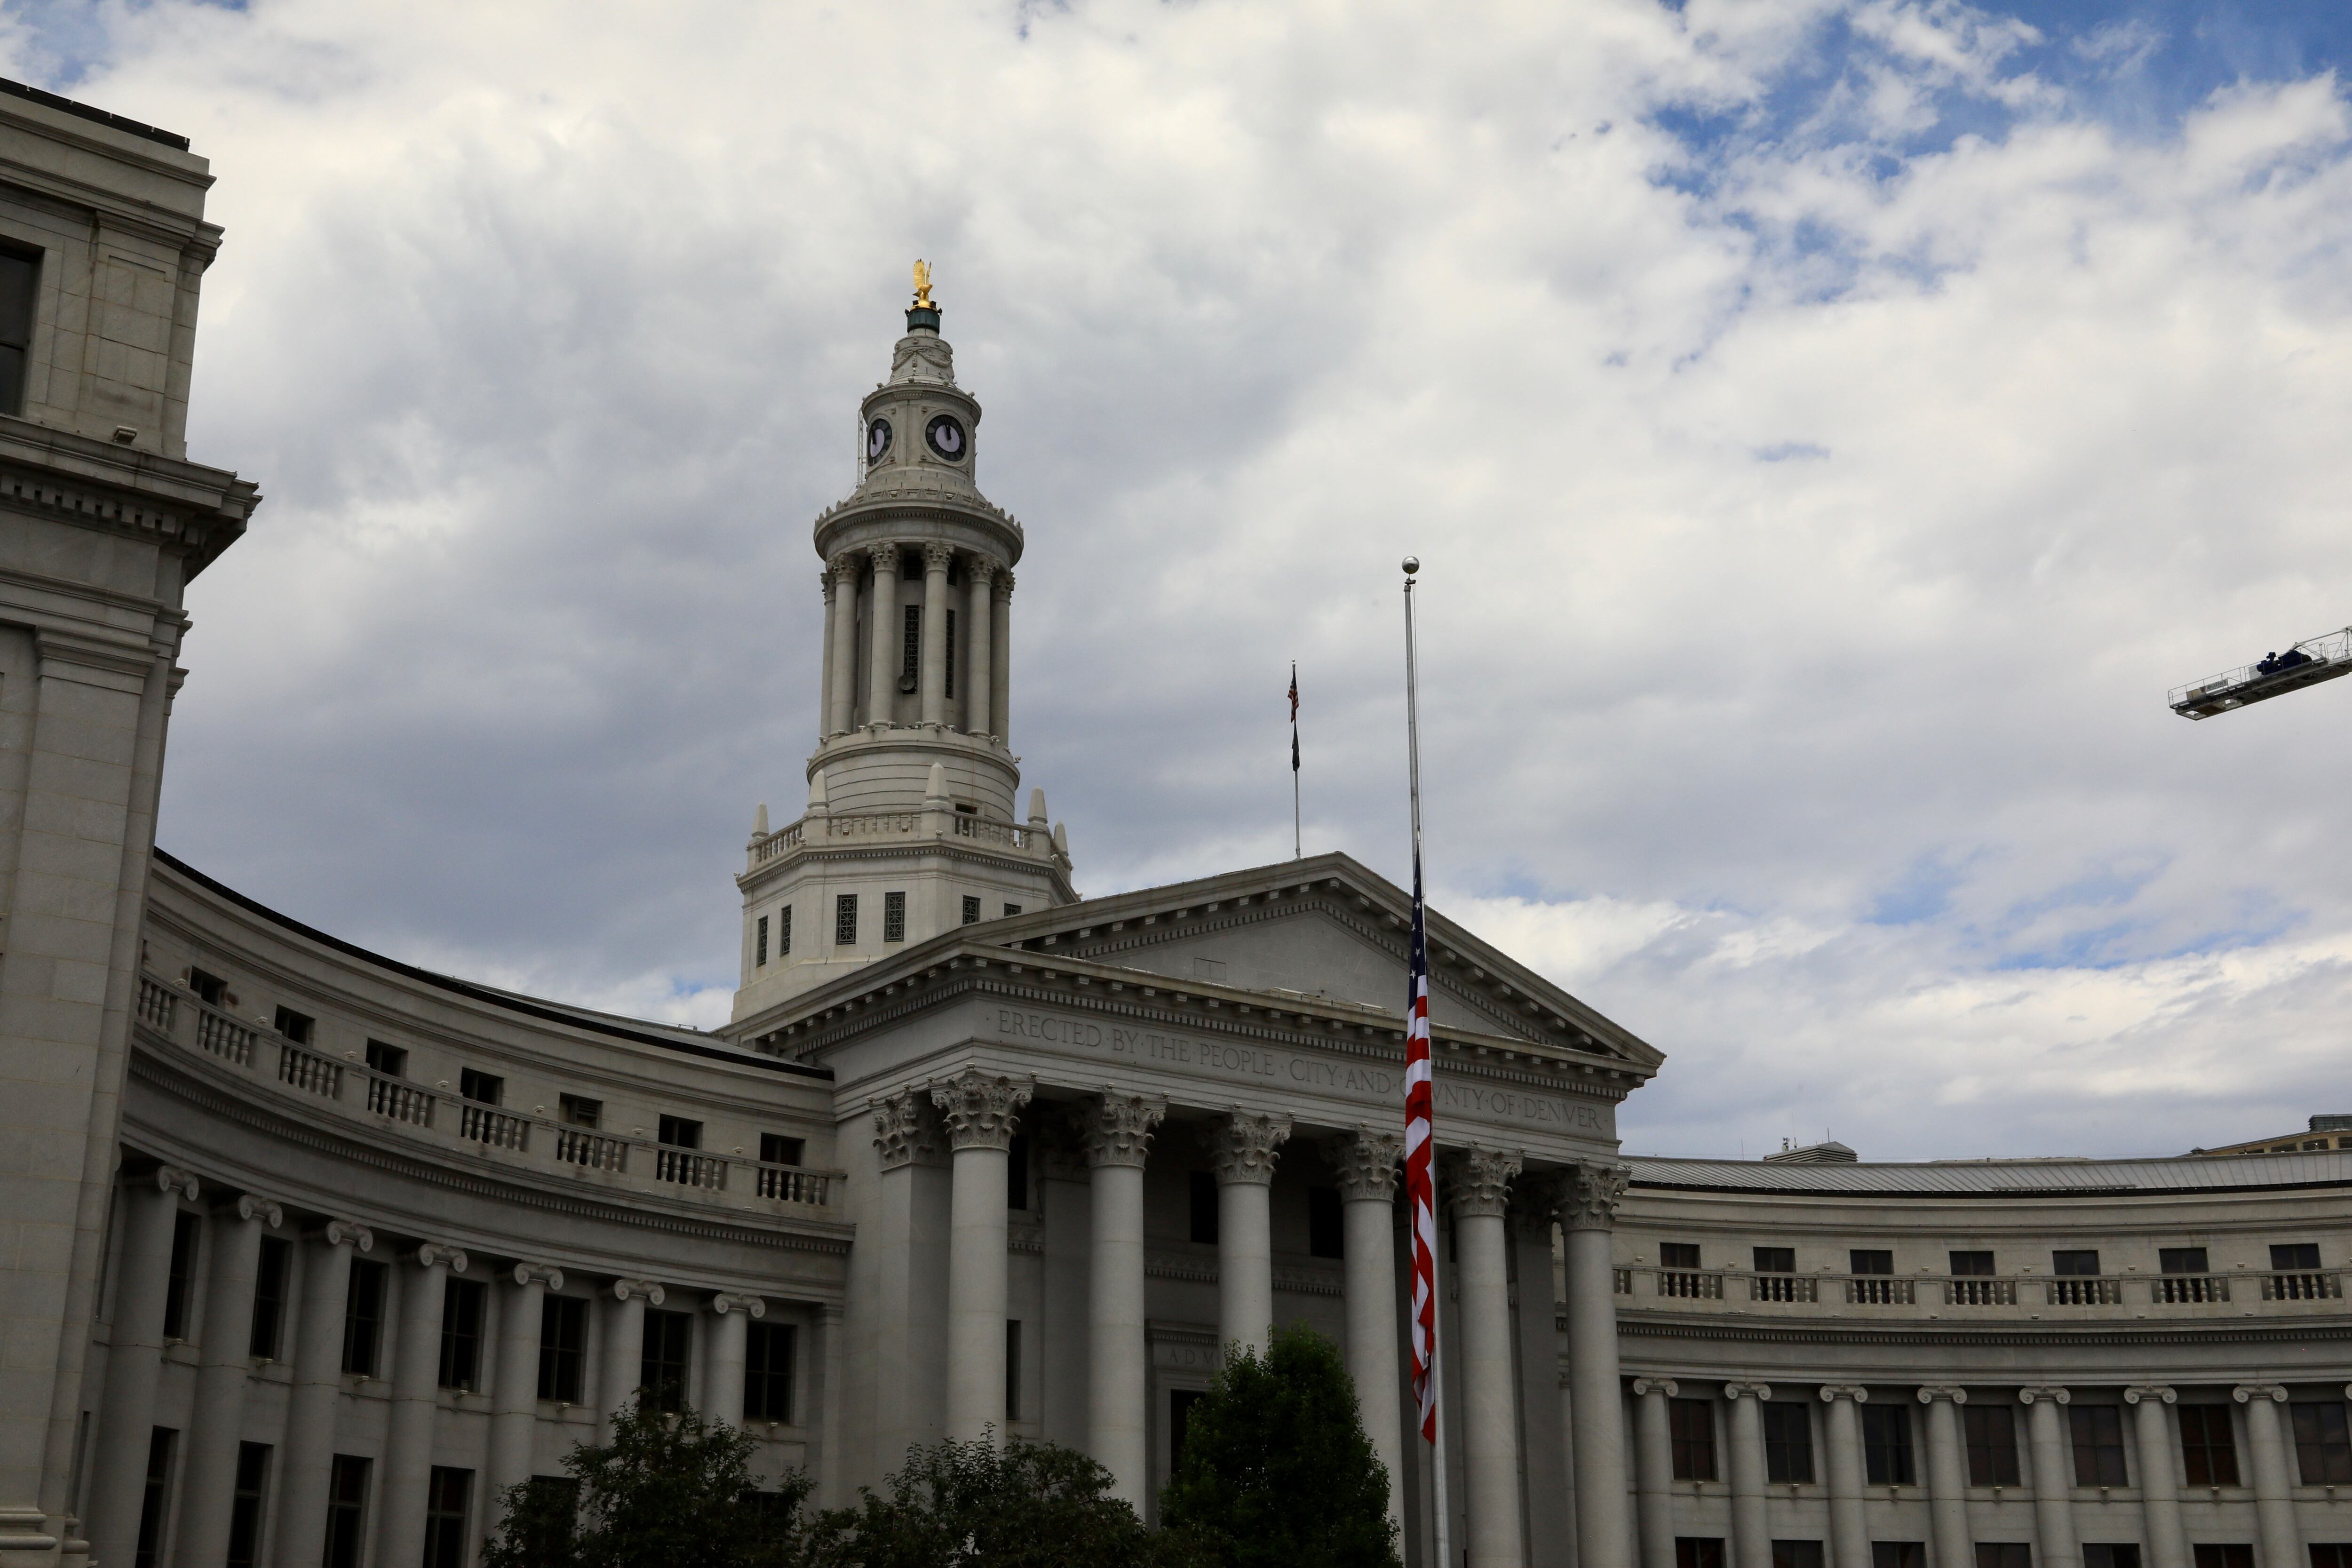 The front columns and tower of the Denver City and County building against a cloudy sky.  